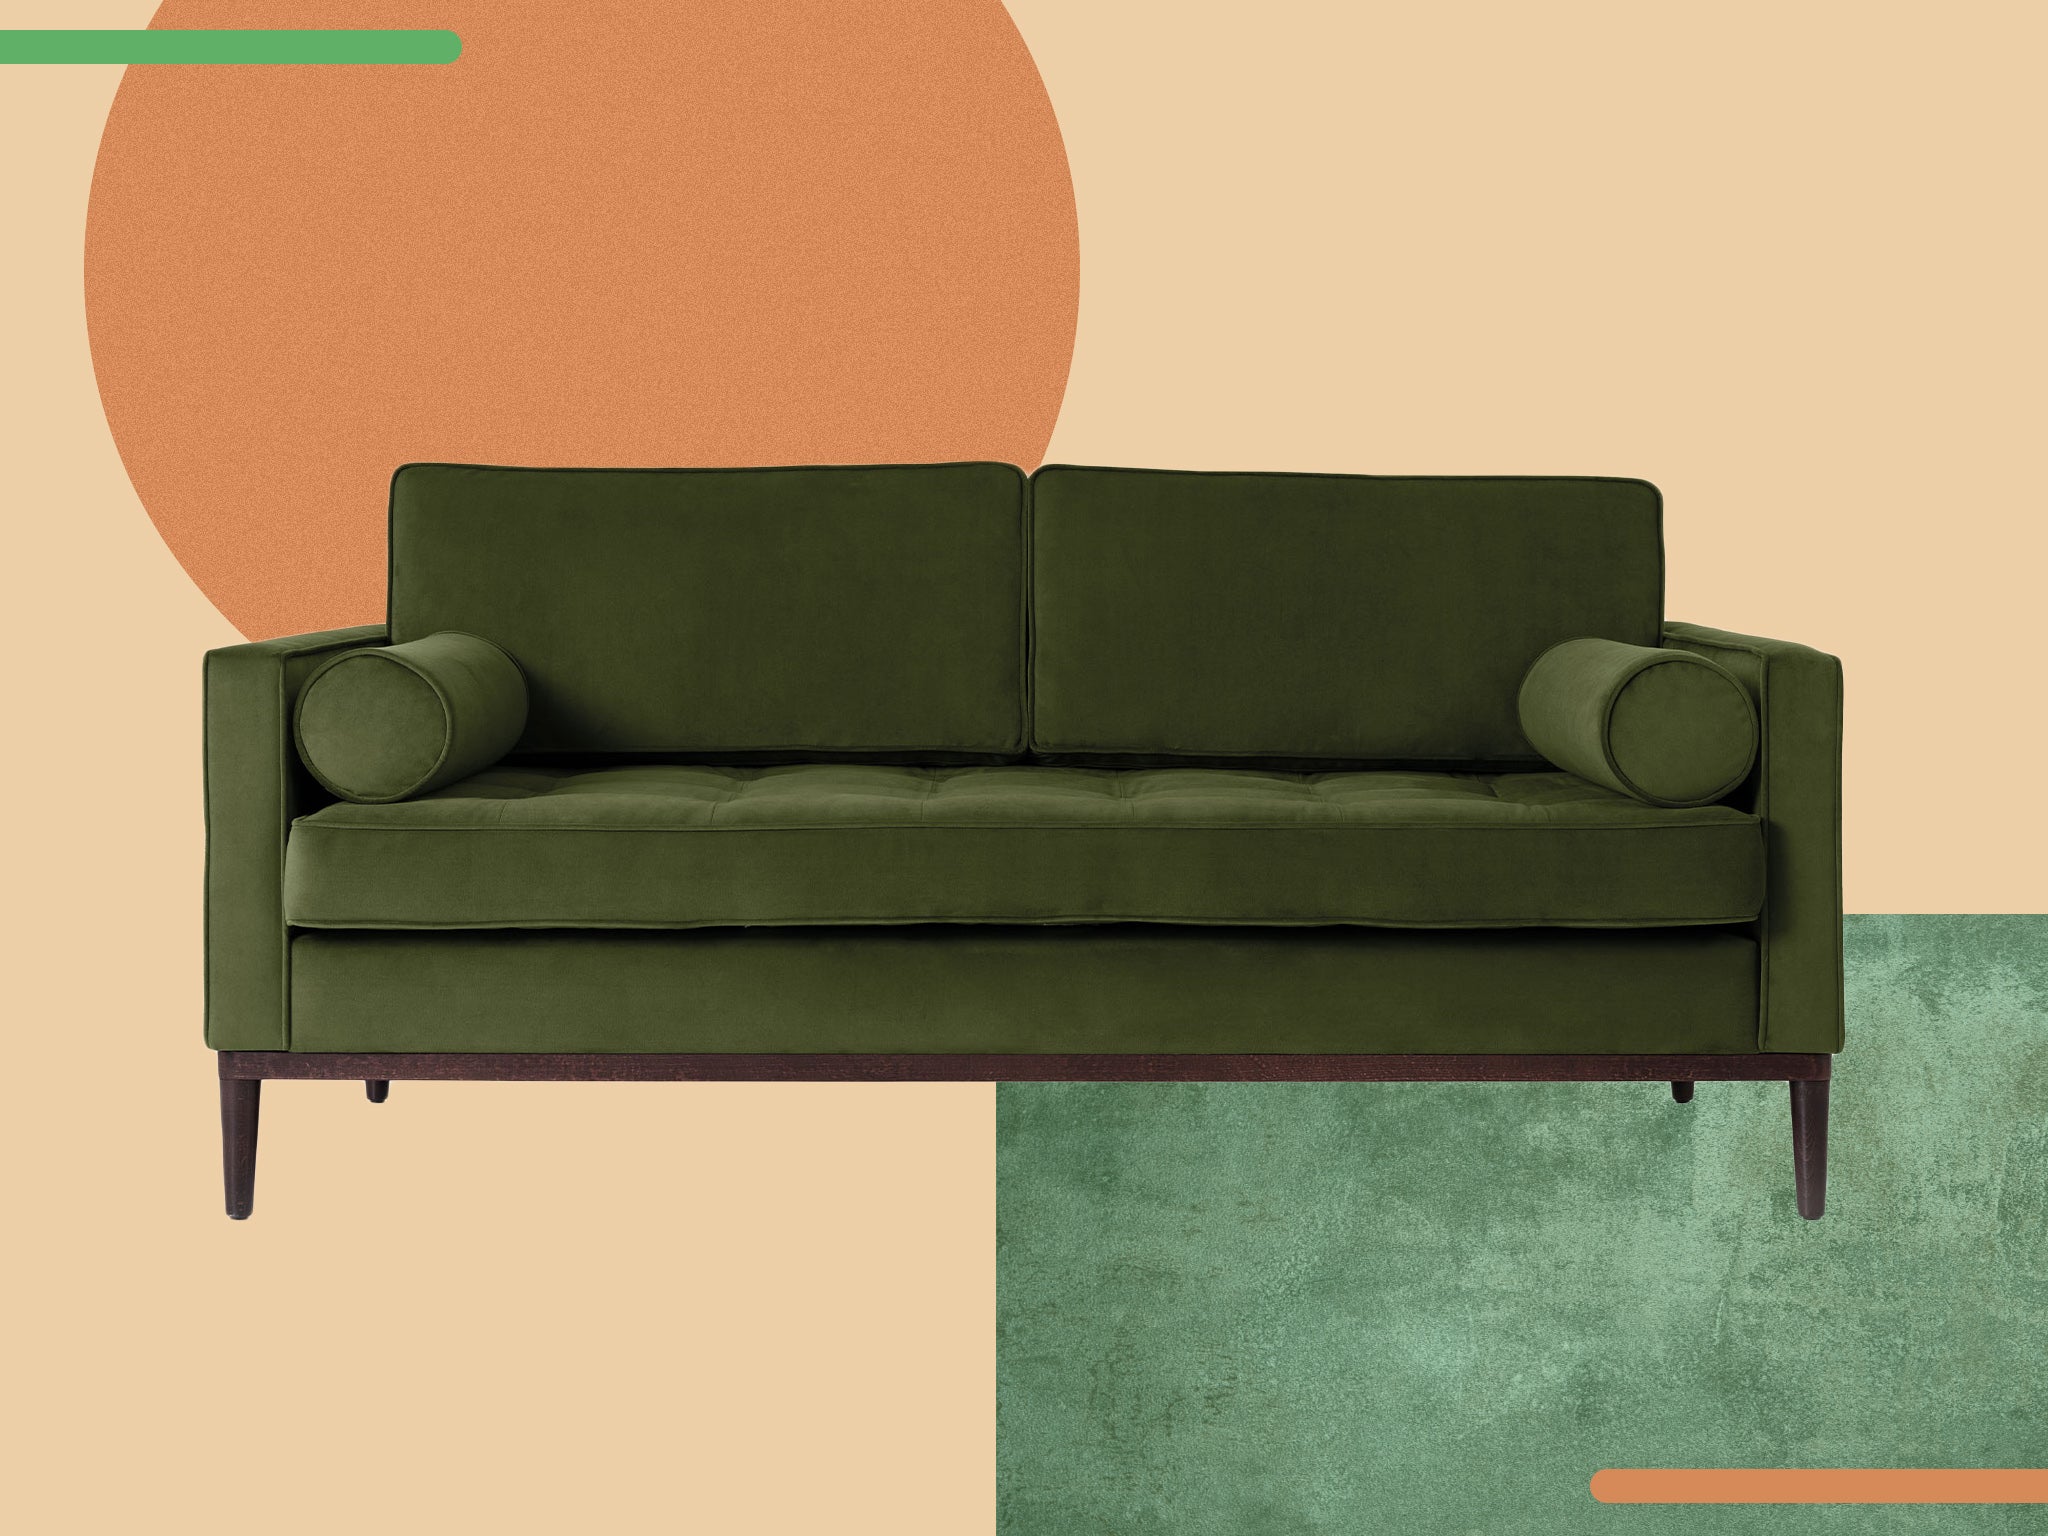 The sofa boasts mid-century shaping with vintage Deco glamour